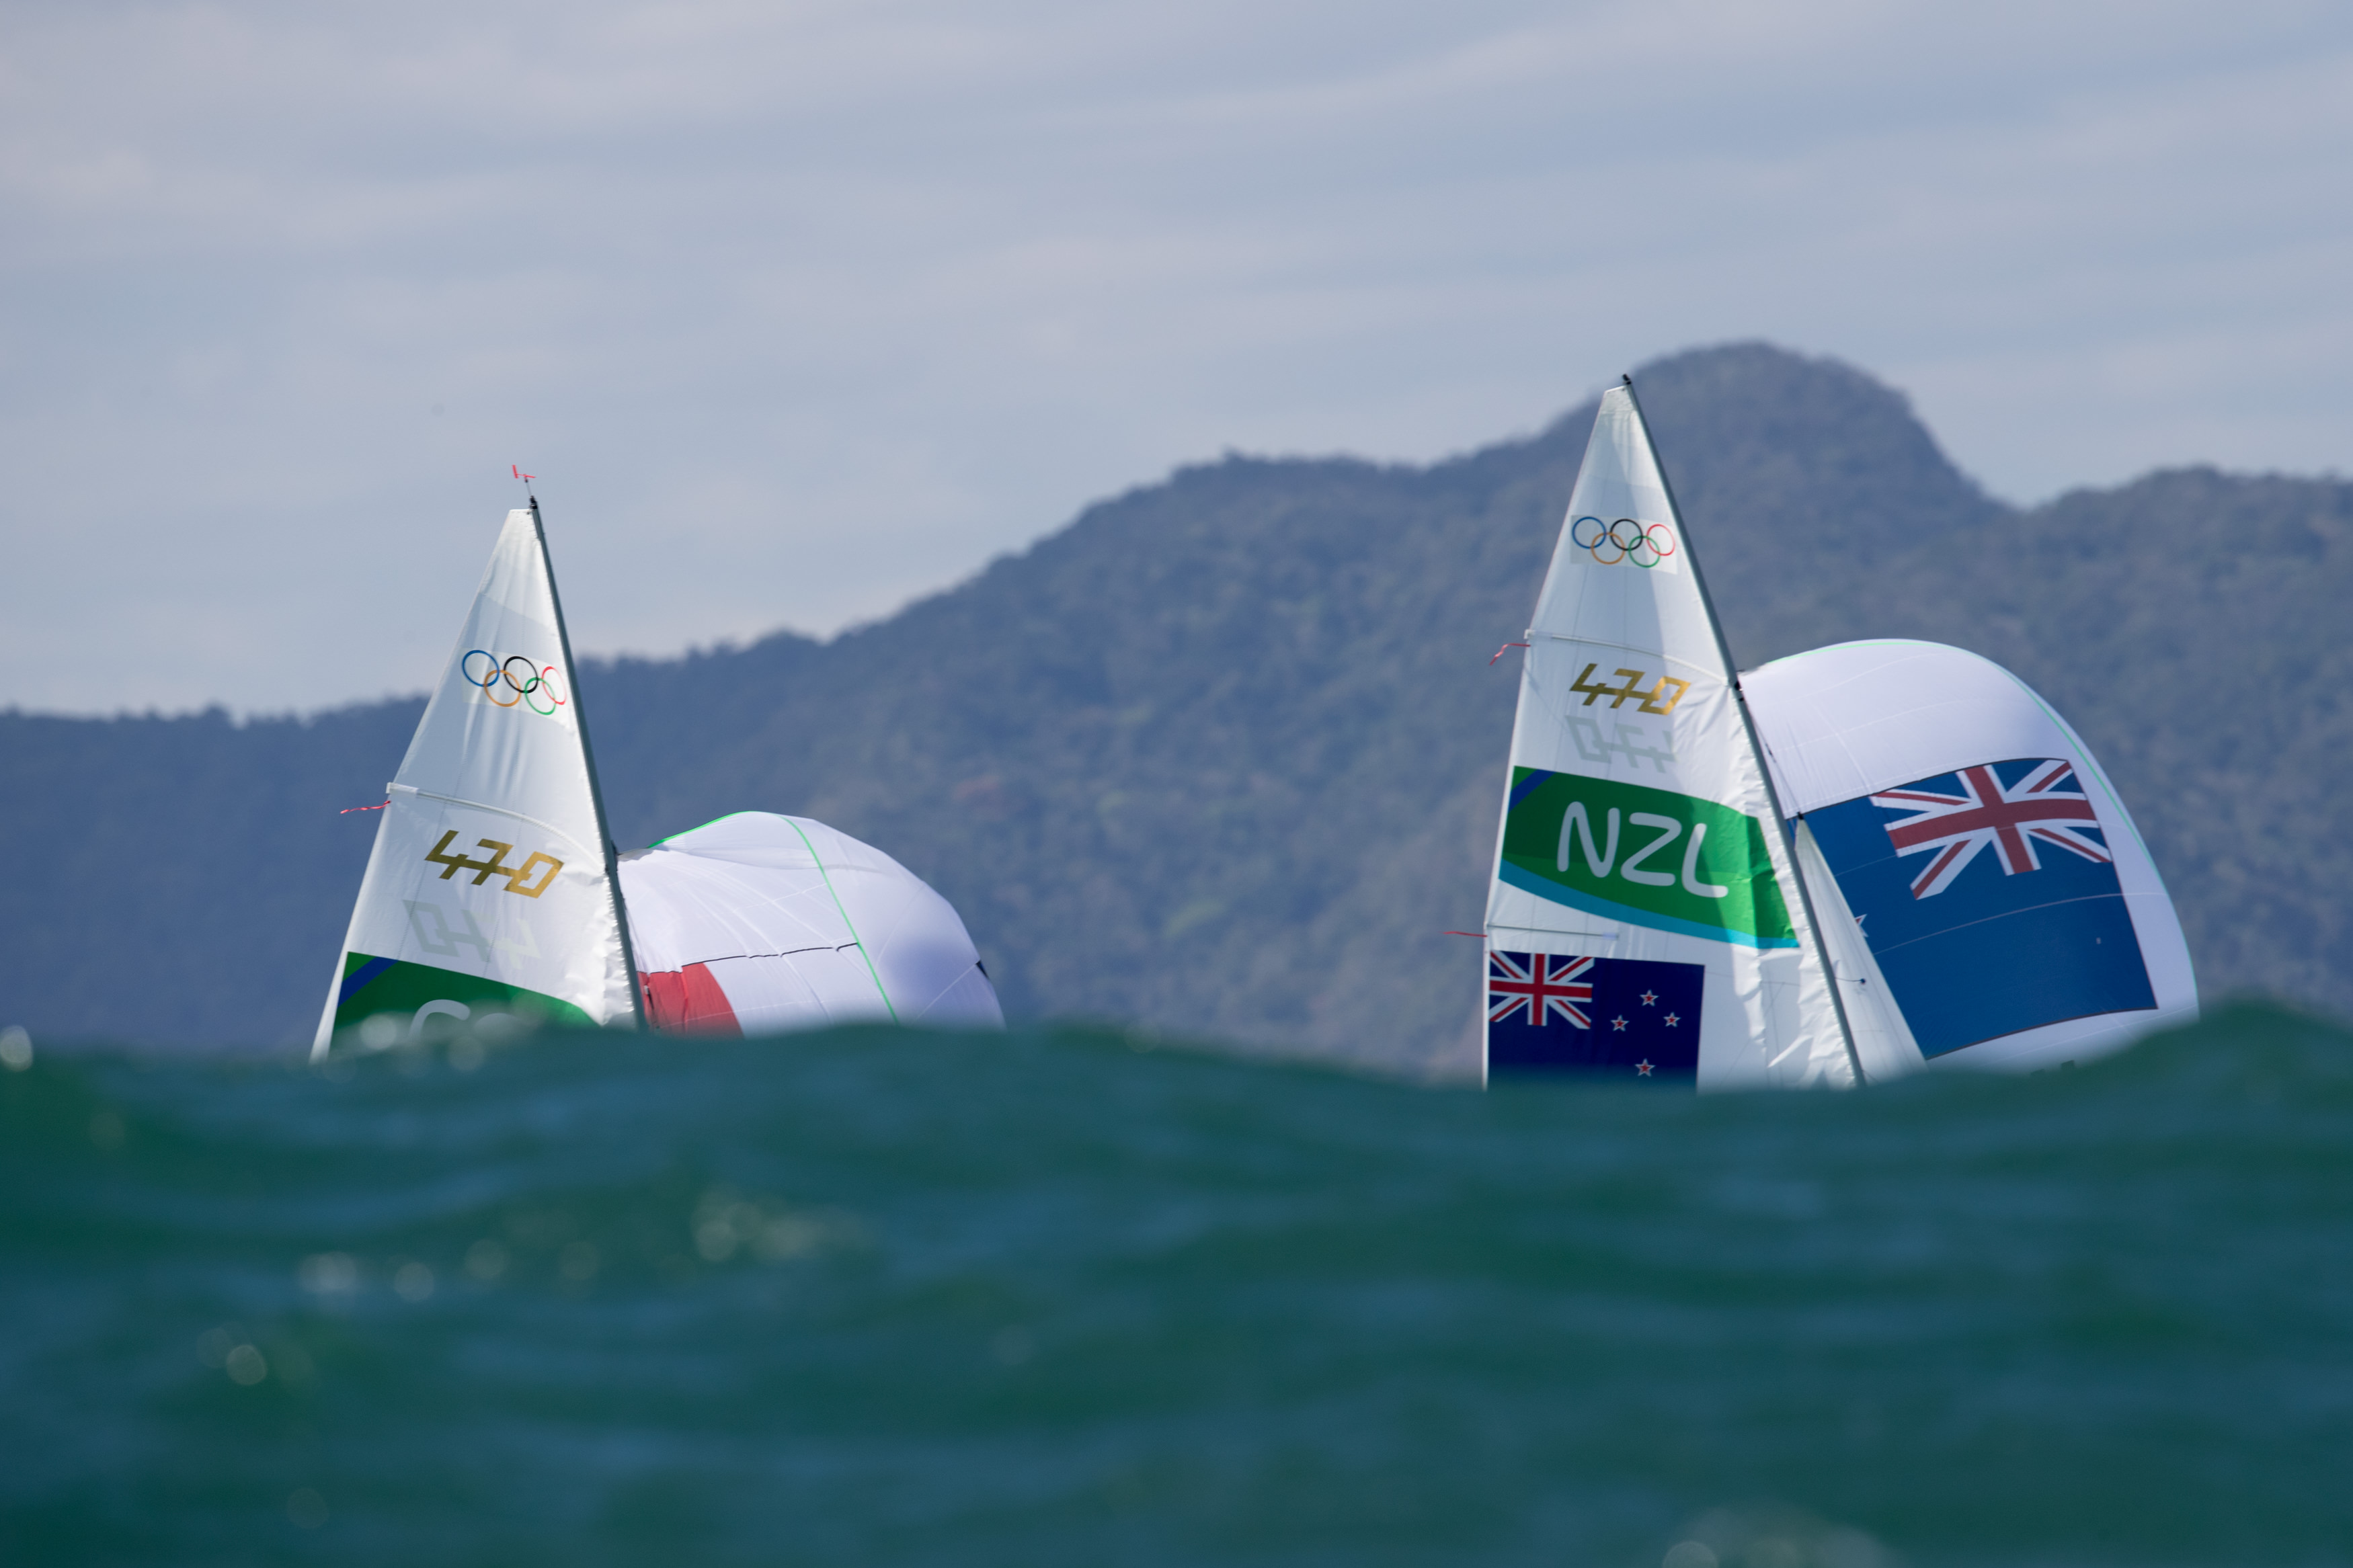 French and New Zealand 470 World Champions get to use a gold 470 logo